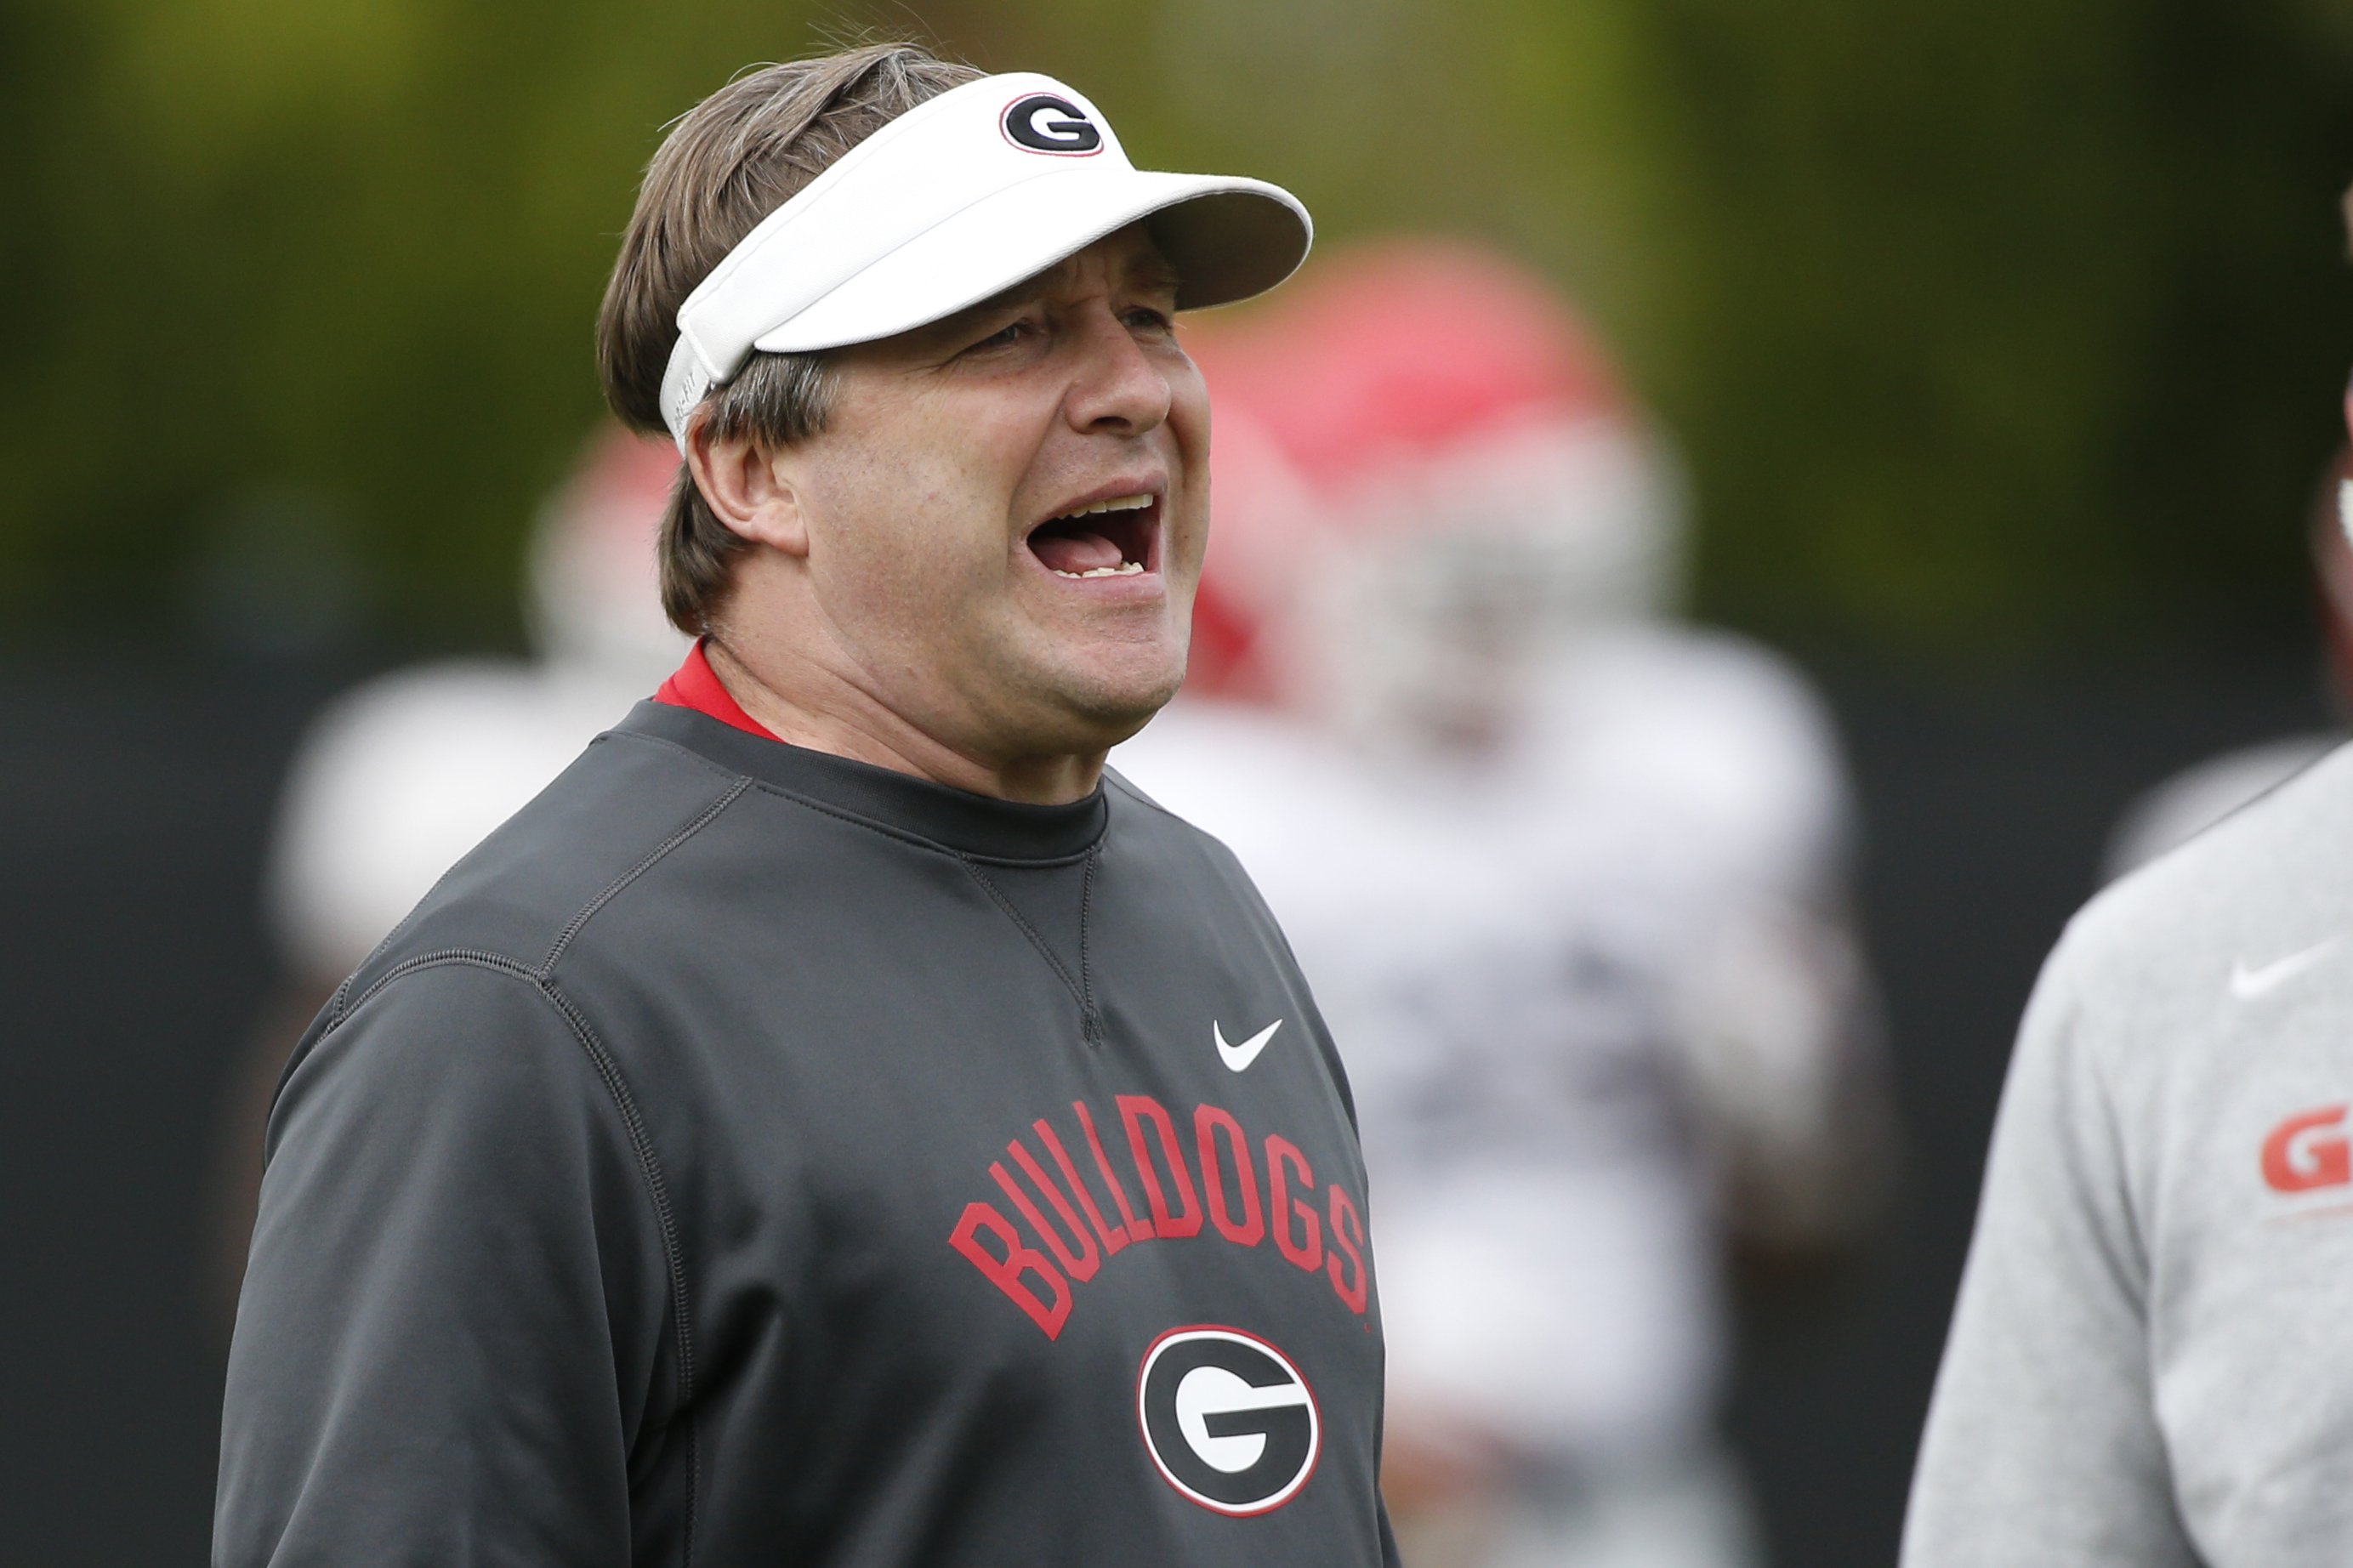 Former UGa player says he experienced racism, manipulation AP News